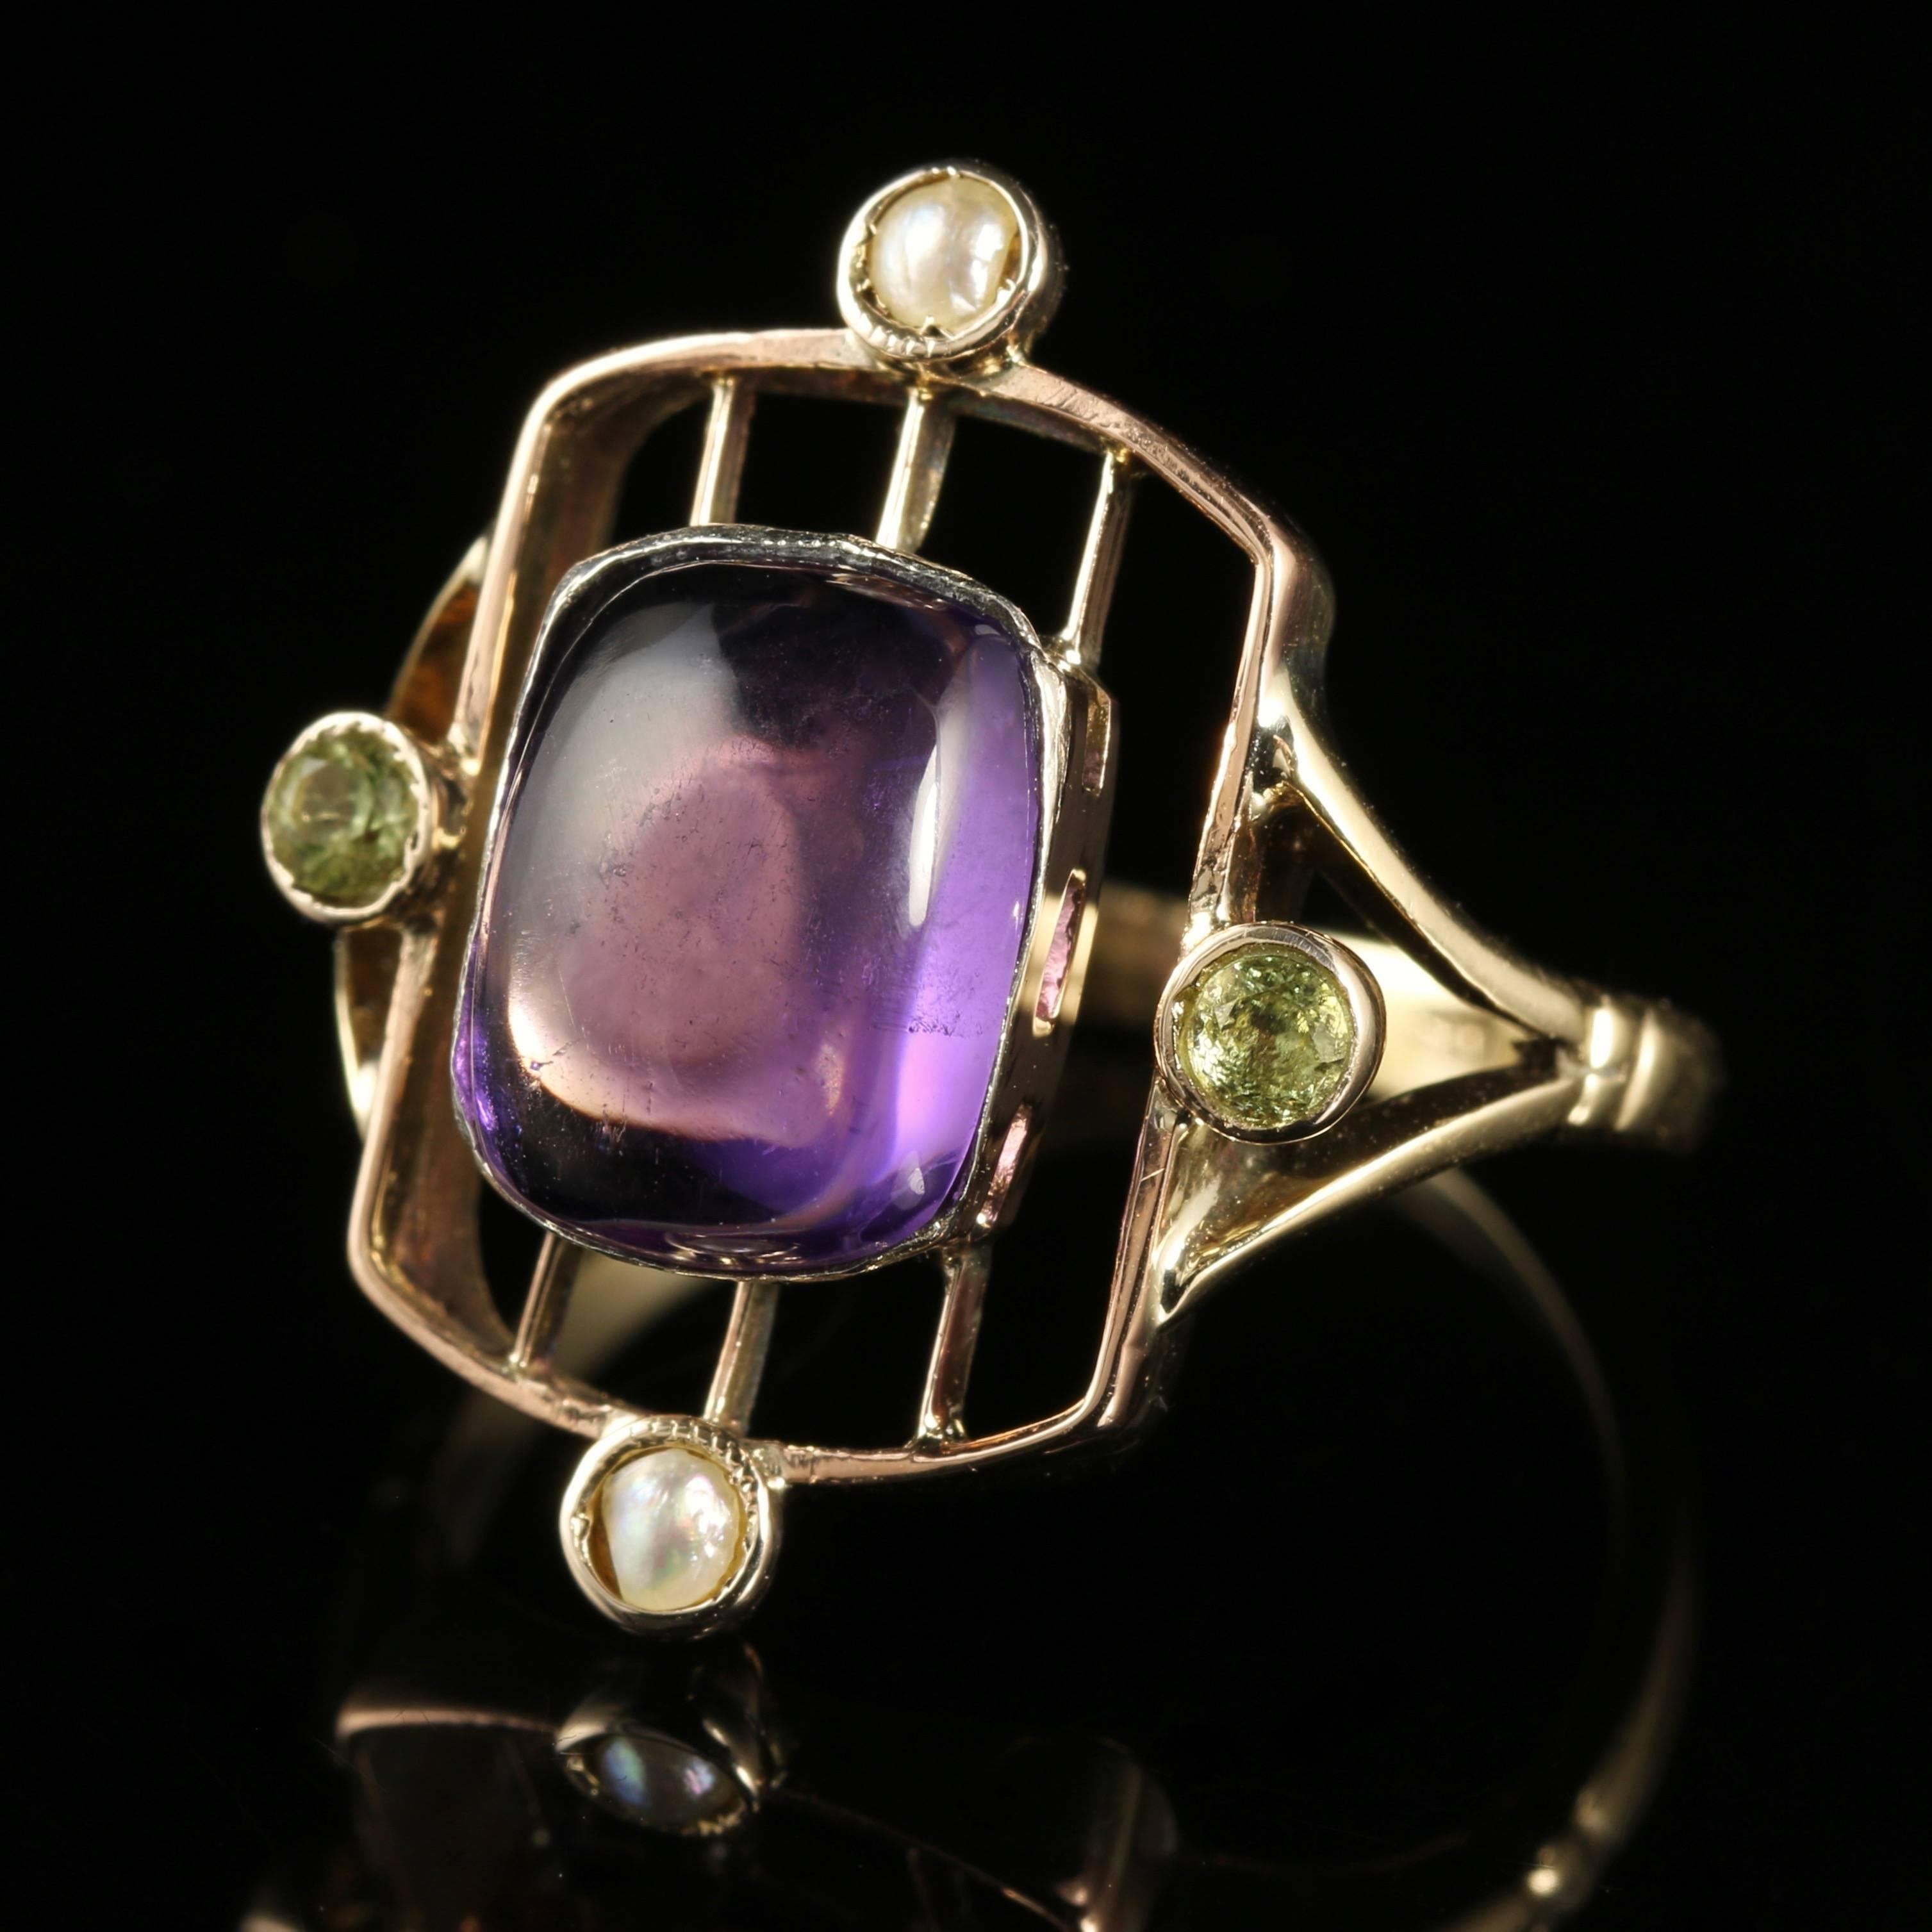 For more details please click continue reading down below...

This genuine Victorian 9ct Gold Suffragette ring is Circa 1900

Set with a beautiful 3.80ct cabochon cut Amethyst in the centre, with 2 lustrous Pearls above and below, and 2 Peridots